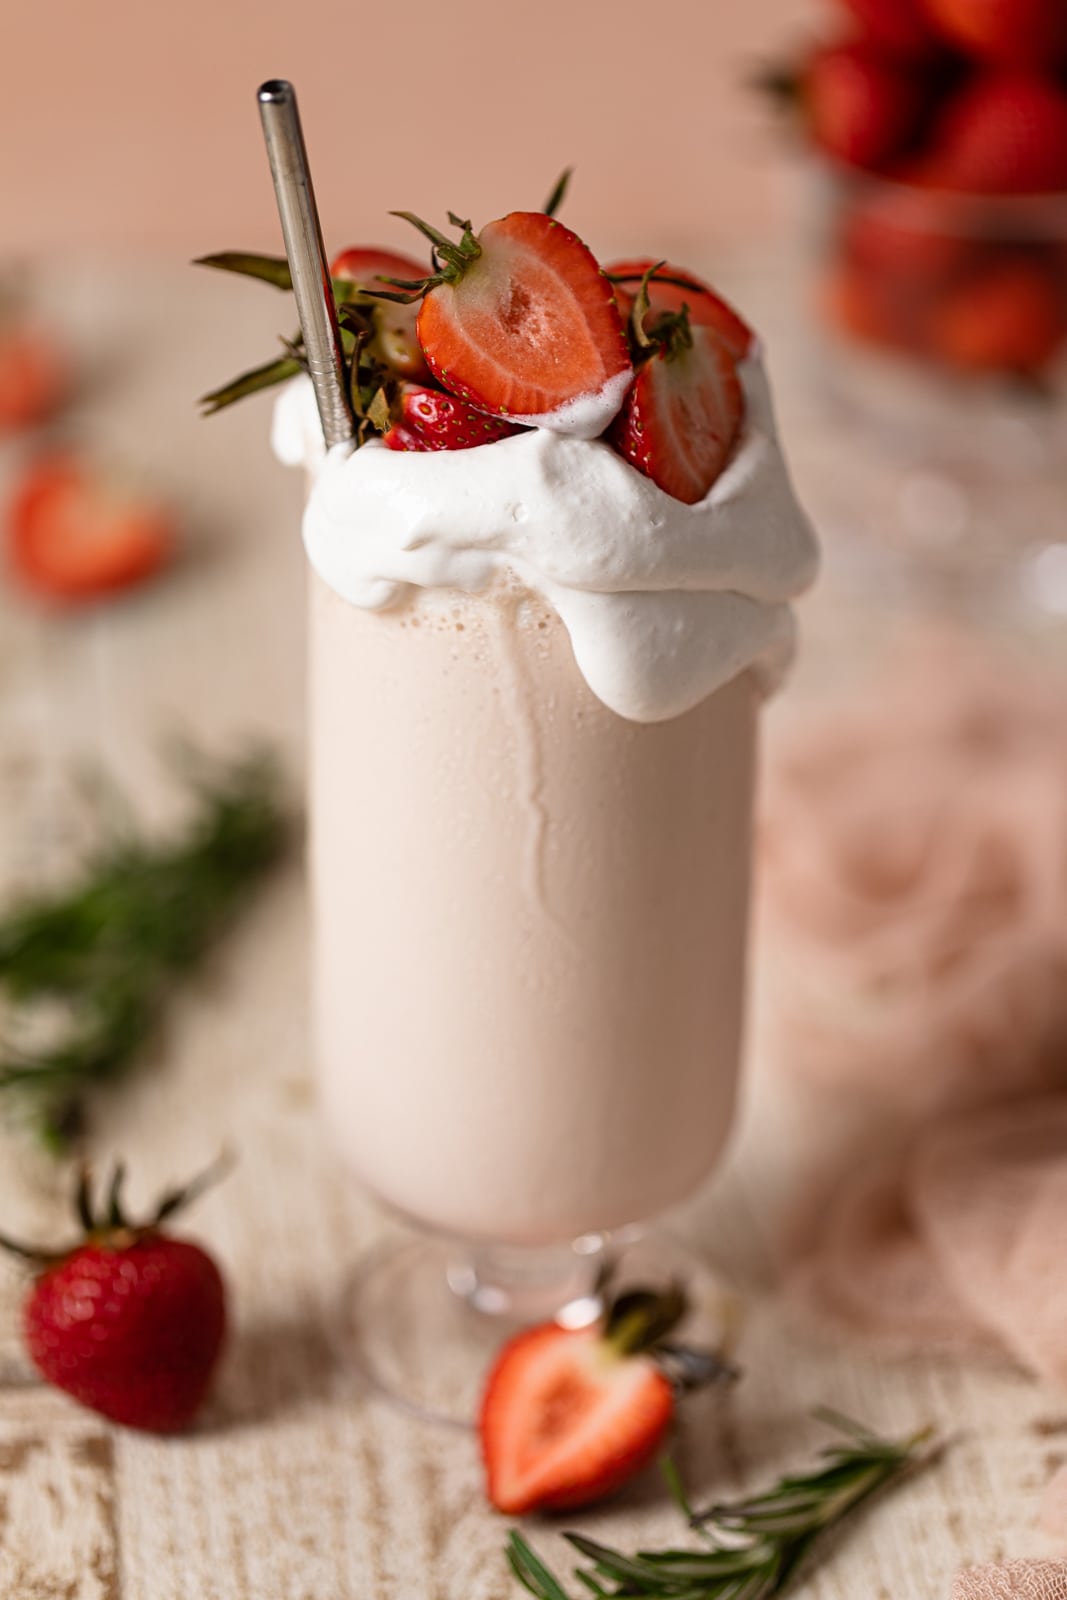 Glass of Dairy-Free Strawberry Milkshake topped with strawberries and coconut whipped cream